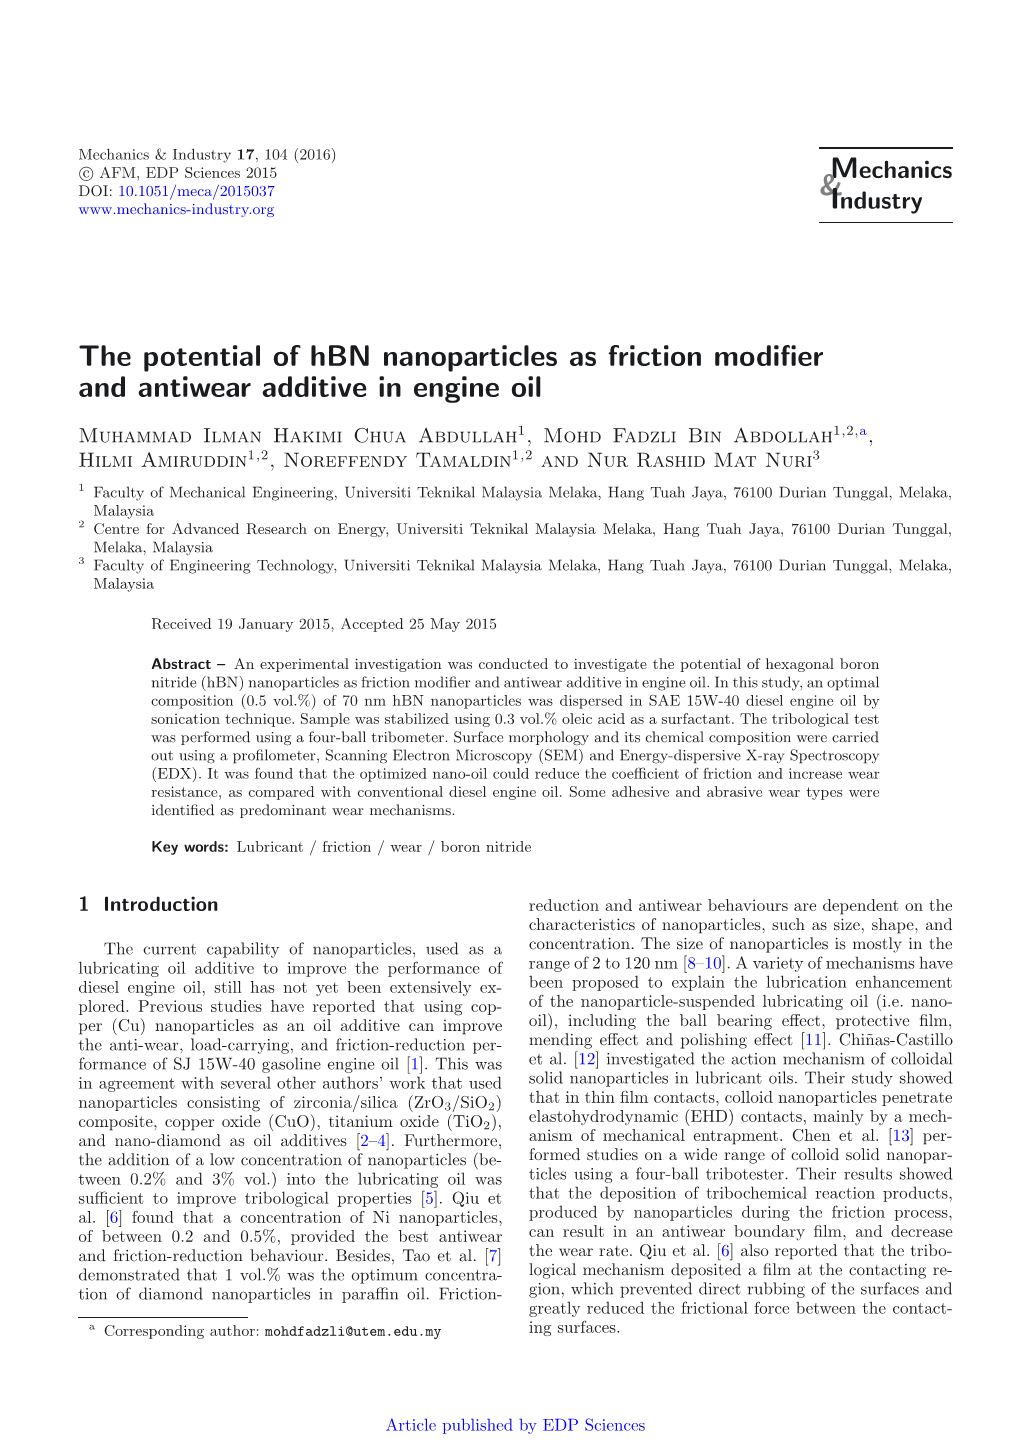 The Potential of Hbn Nanoparticles As Friction Modifier and Antiwear Additive in Engine